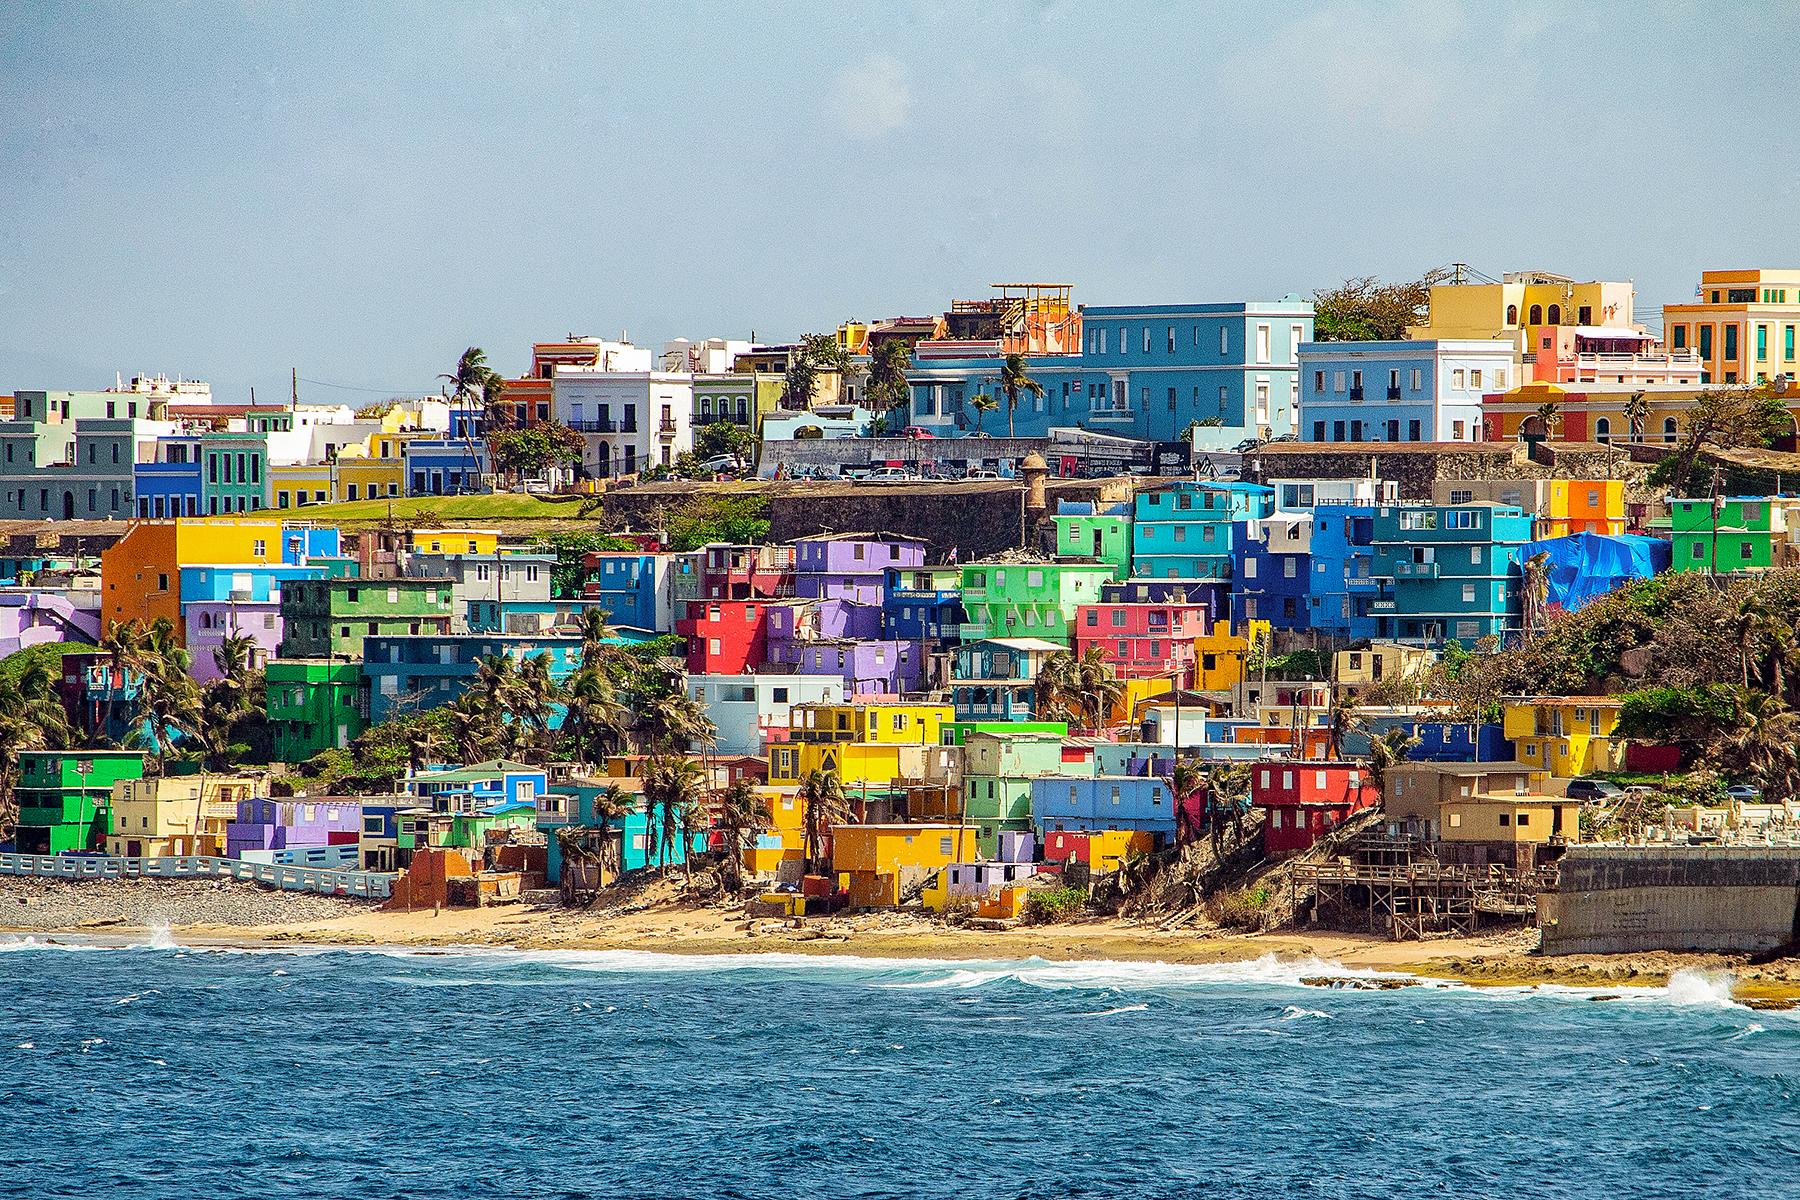 What You Need To Know Before You Go To Puerto Rico